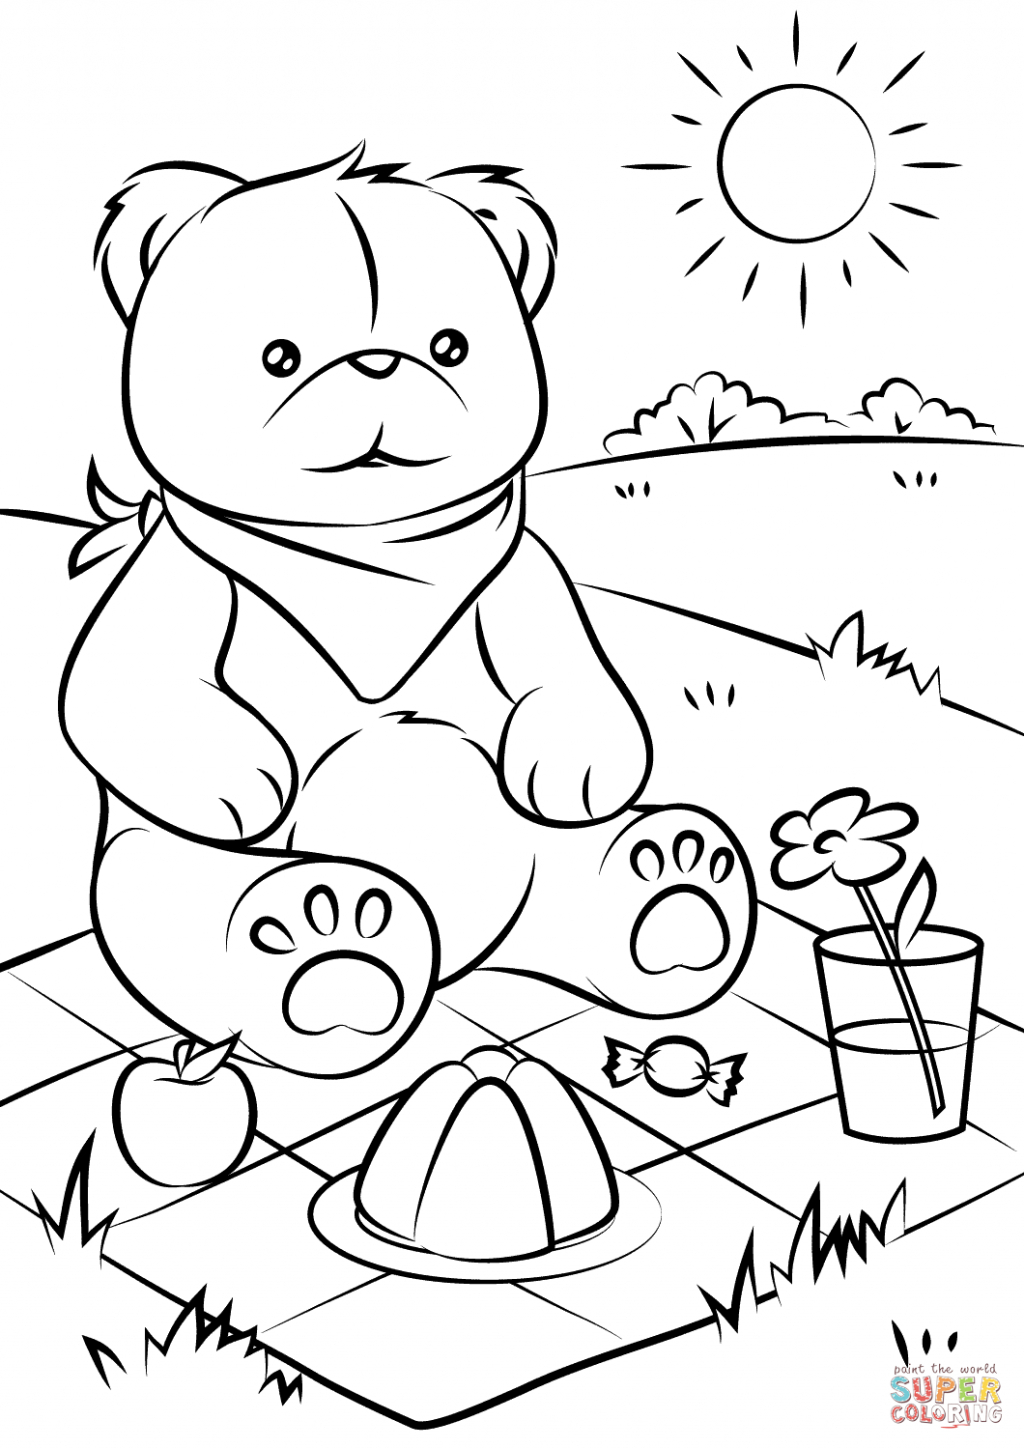 Bear Coloring Pages Coloring Pages Teddy Bear Coloring Sheet Adult - Teddy Bear Coloring Pages Free Printable